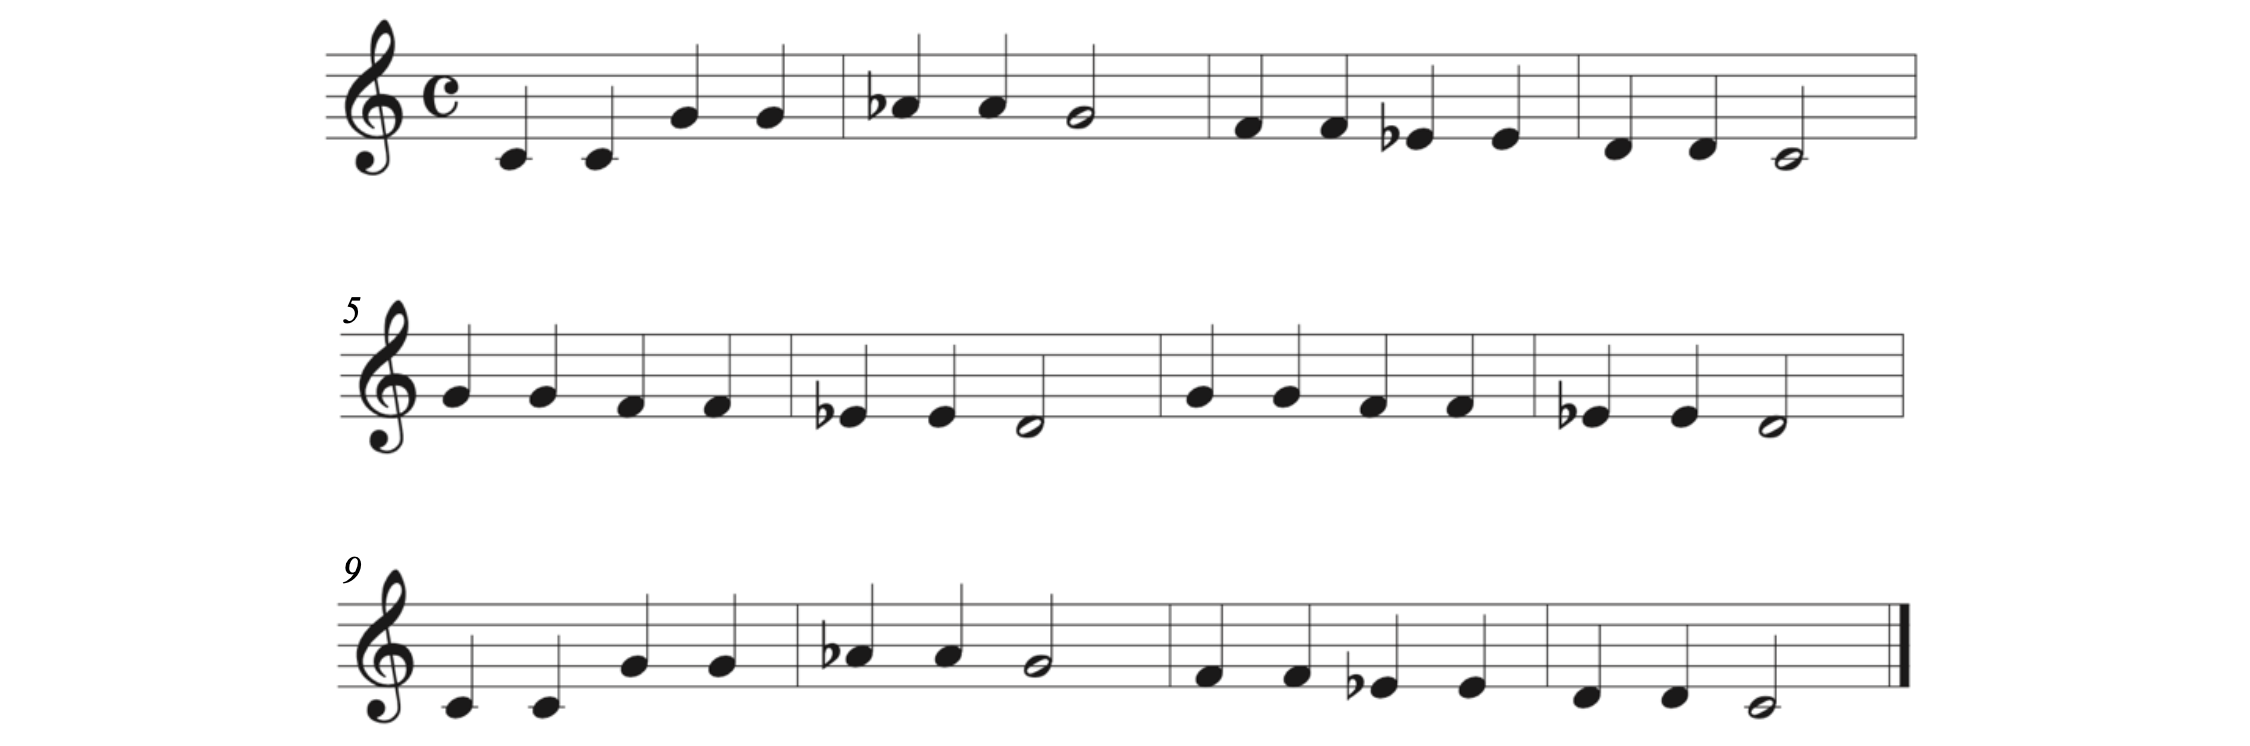 Example is "Twinkle Twinkle Little Star" in C major but with added A-flats and E-flats.